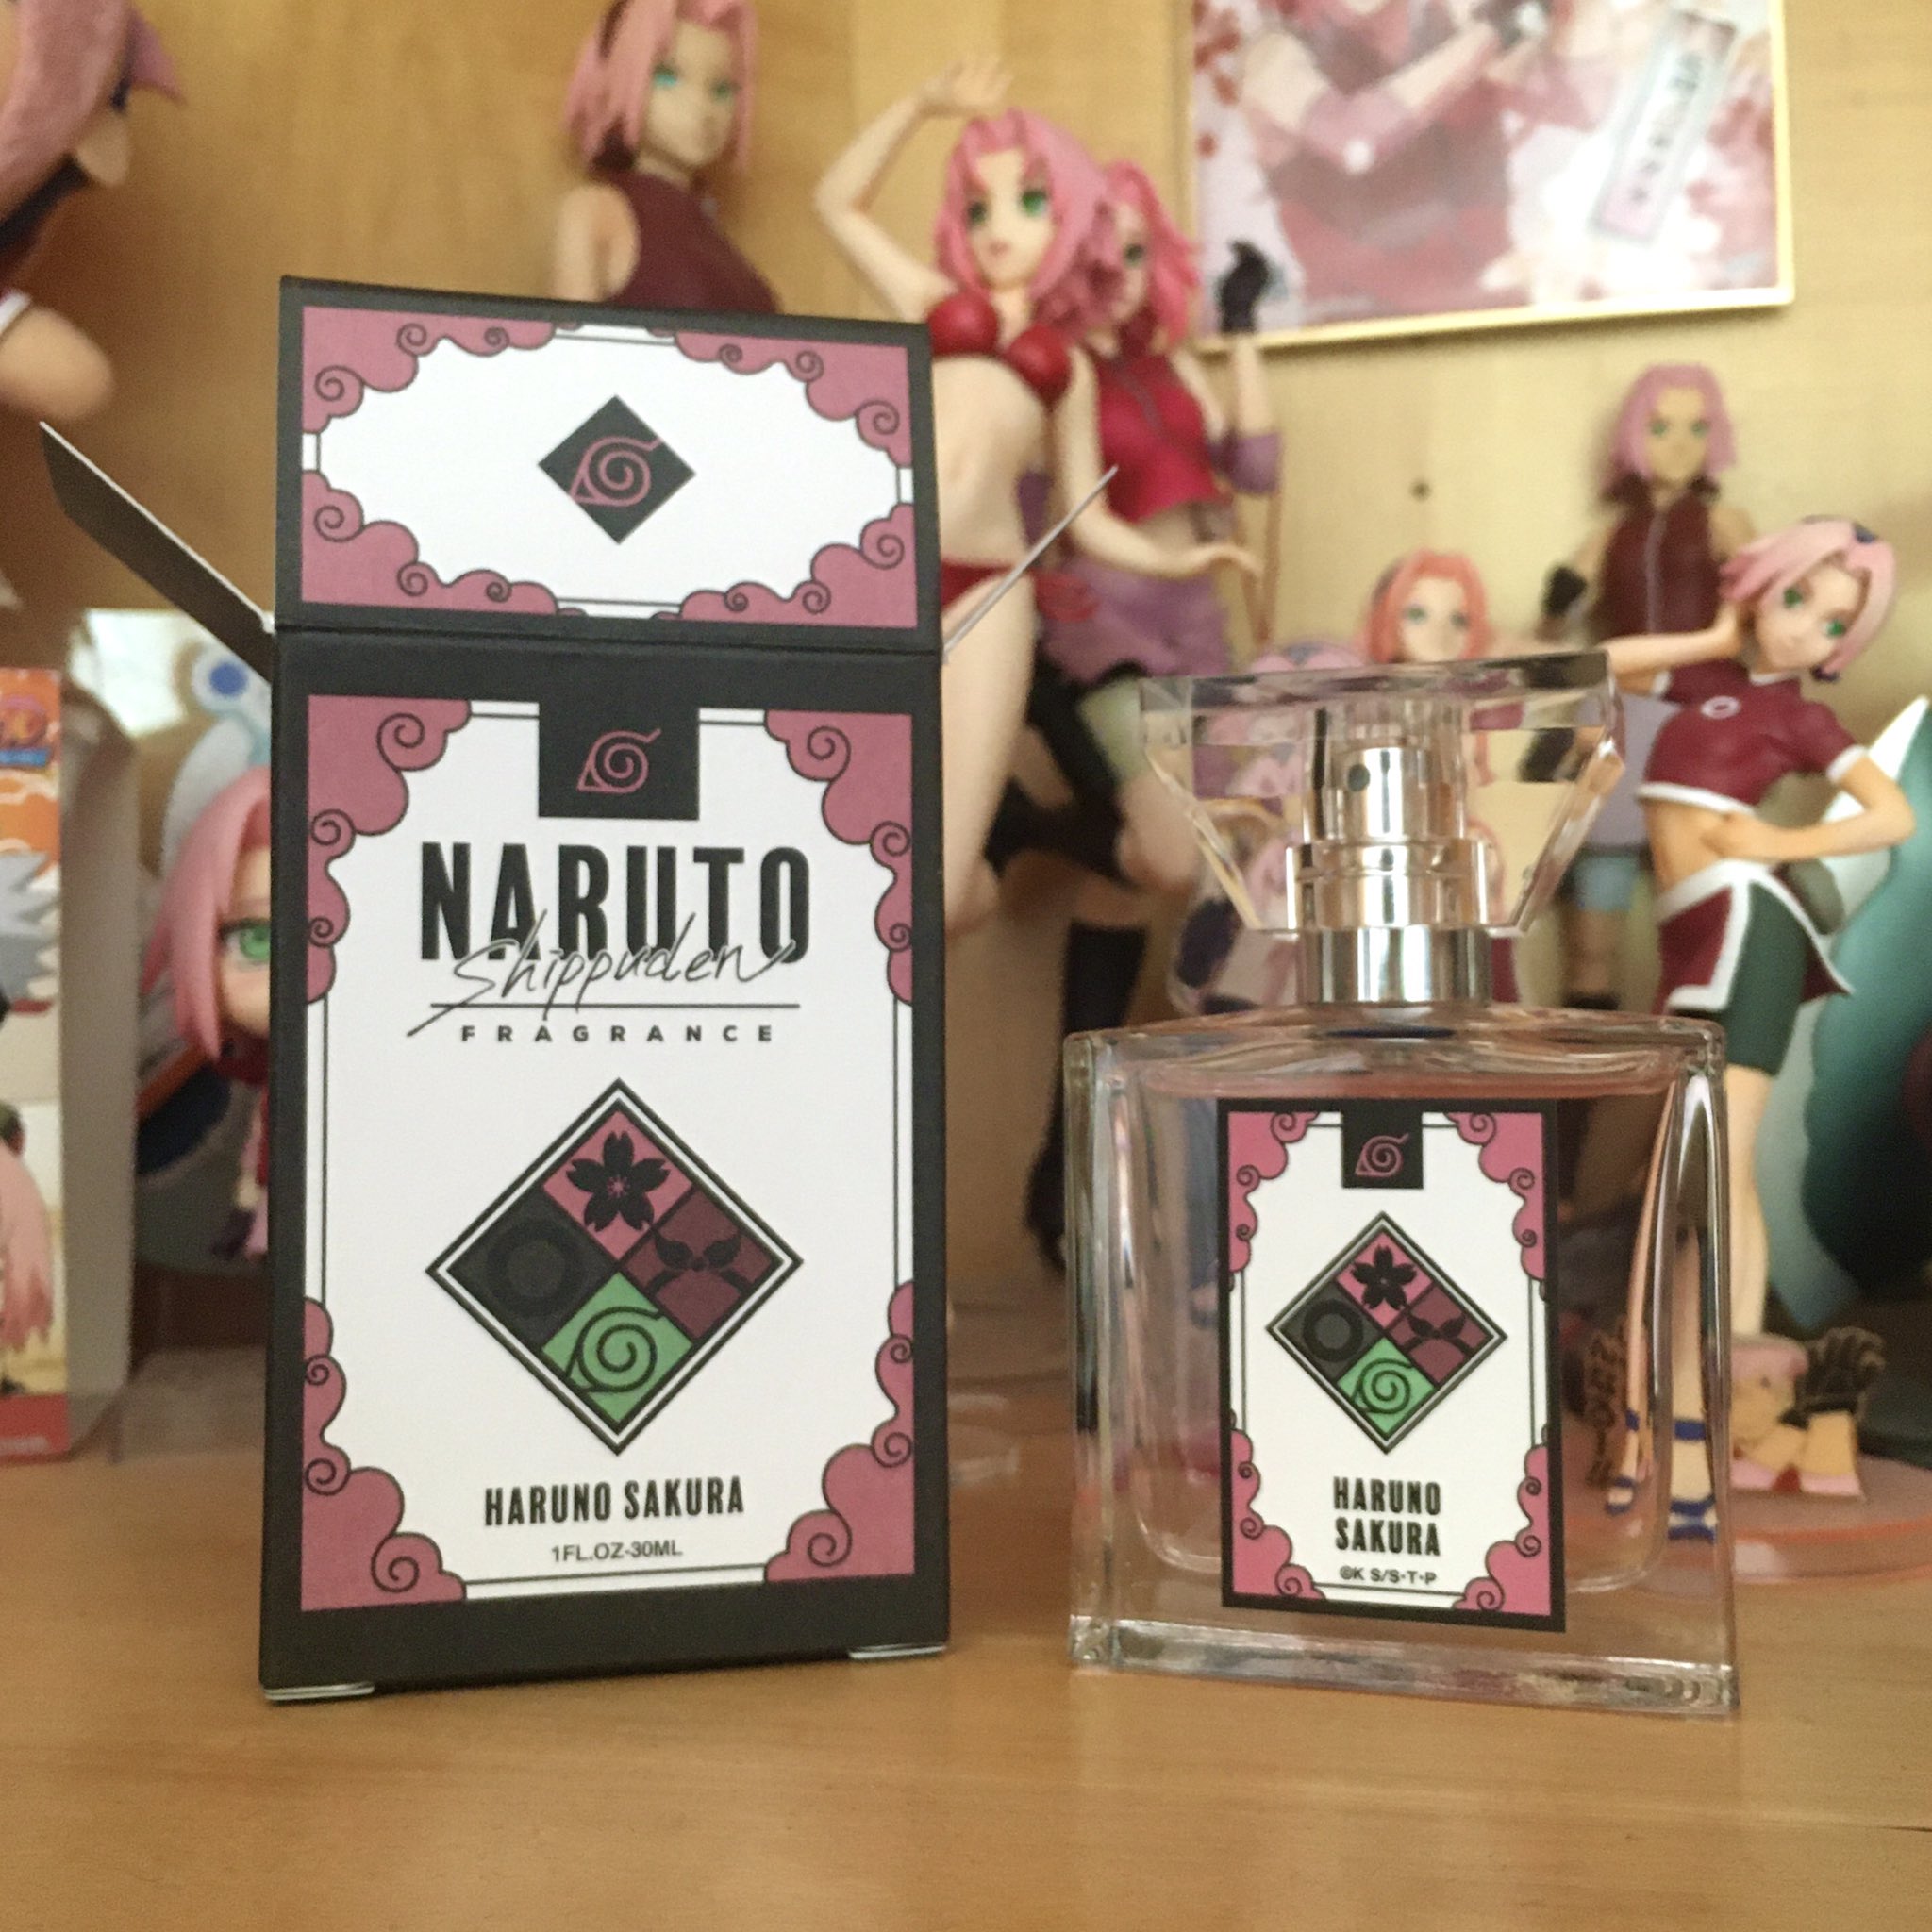 ImagePhoto of a shelf displaying multiple figures and goods featuring Sakura Haruno from Naruto. In the front is an opened box of Sakura Haruno Perfume from primaniacs, a Japanese perfume company, with the perfume bottle out beside it.